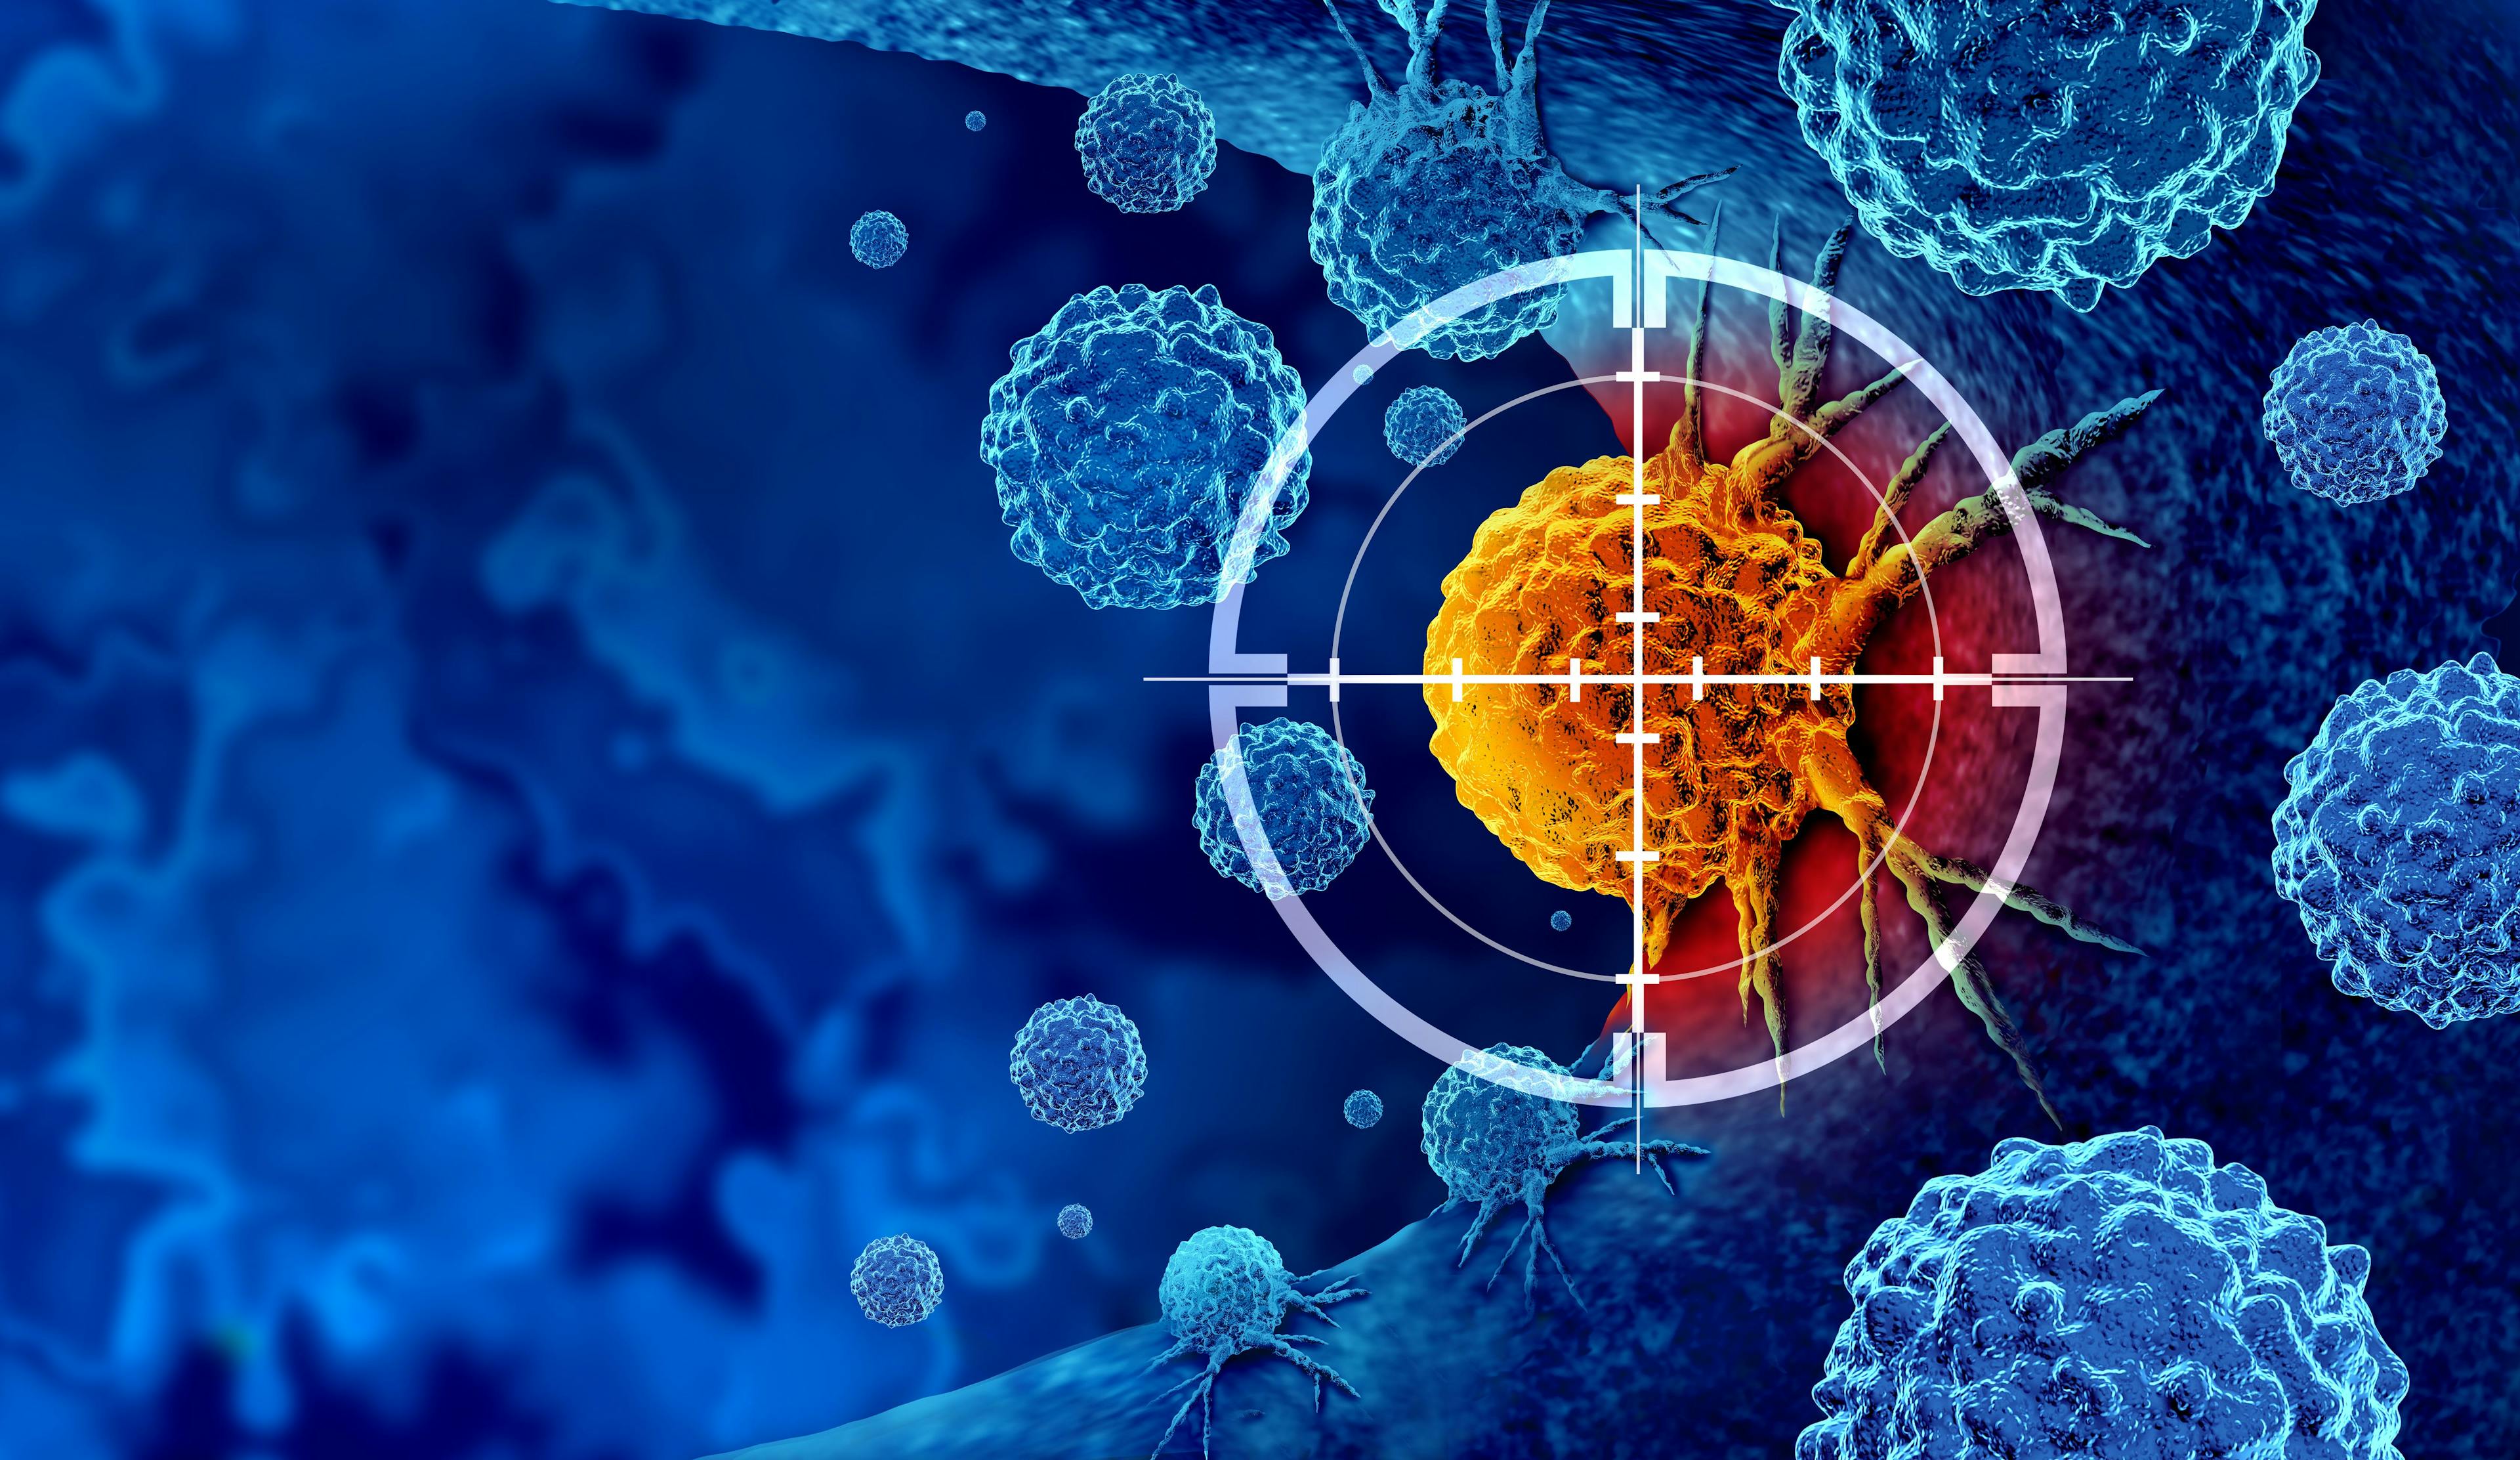 Cancer detection and screening as a treatment for malignant cells with a biopsy or testing caused by carcinogens and genetics with a cancerous cell as an immunotherapy symbol | Image Credit: © freshidea - stock.adobe.com